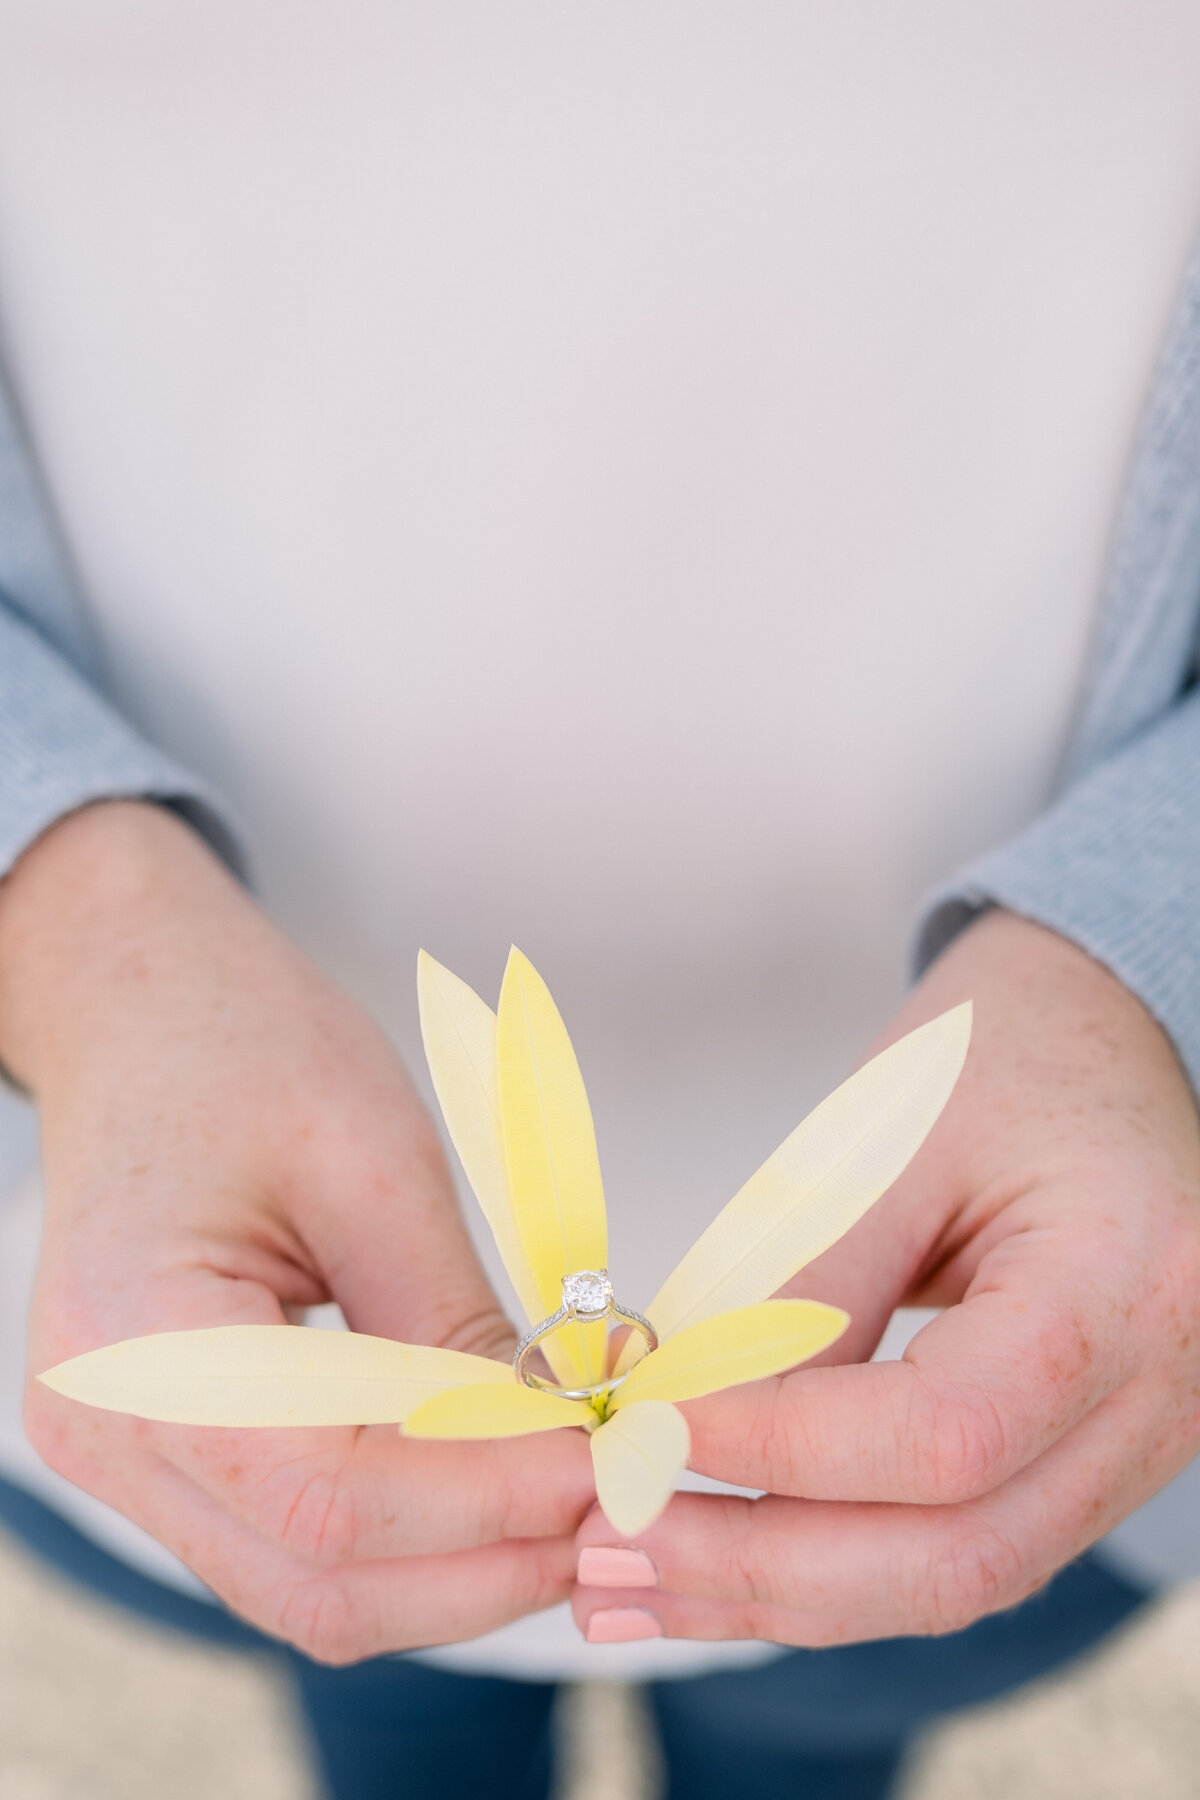 Bride to be holds a colorful yellow flower with her engagement ring inside the flower